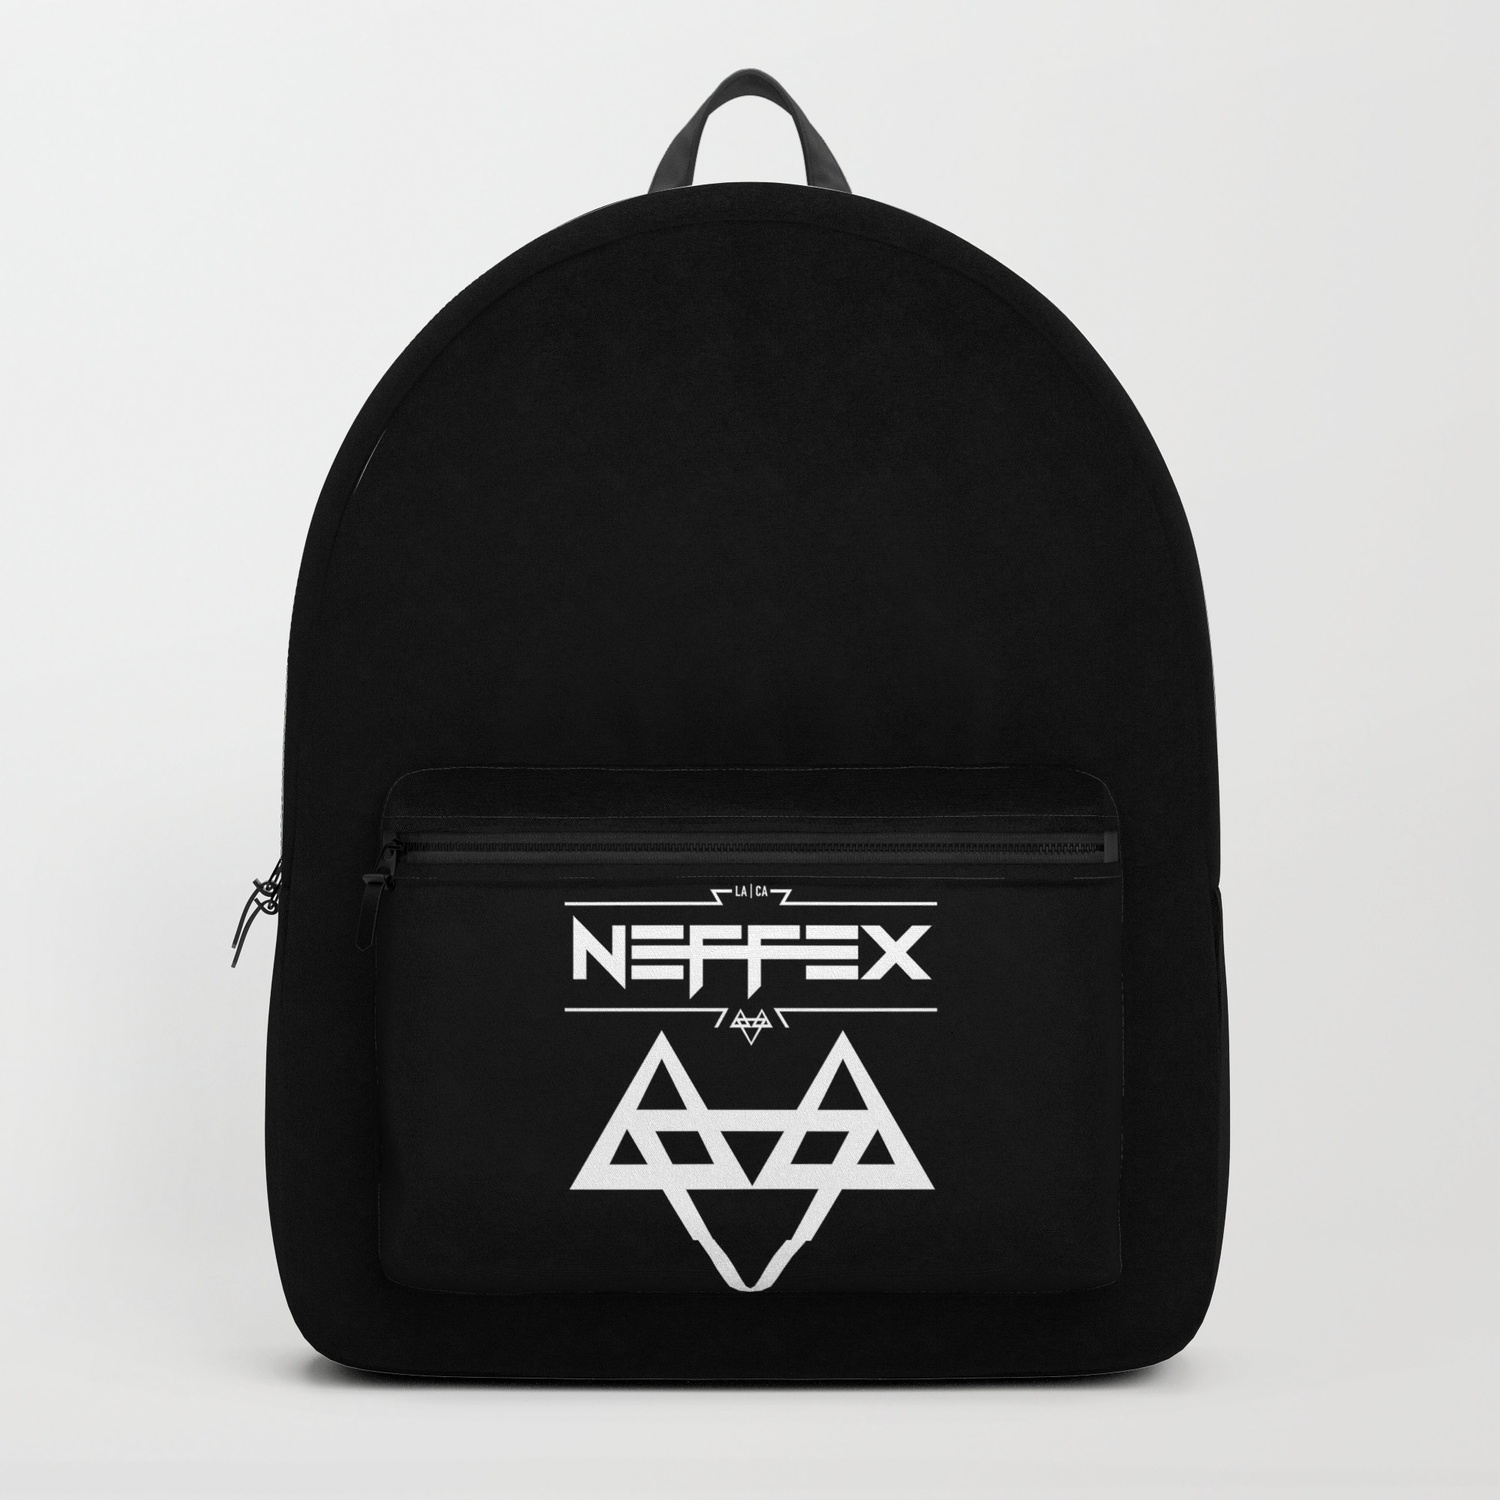 Neffex Backpack By Naayu Society6